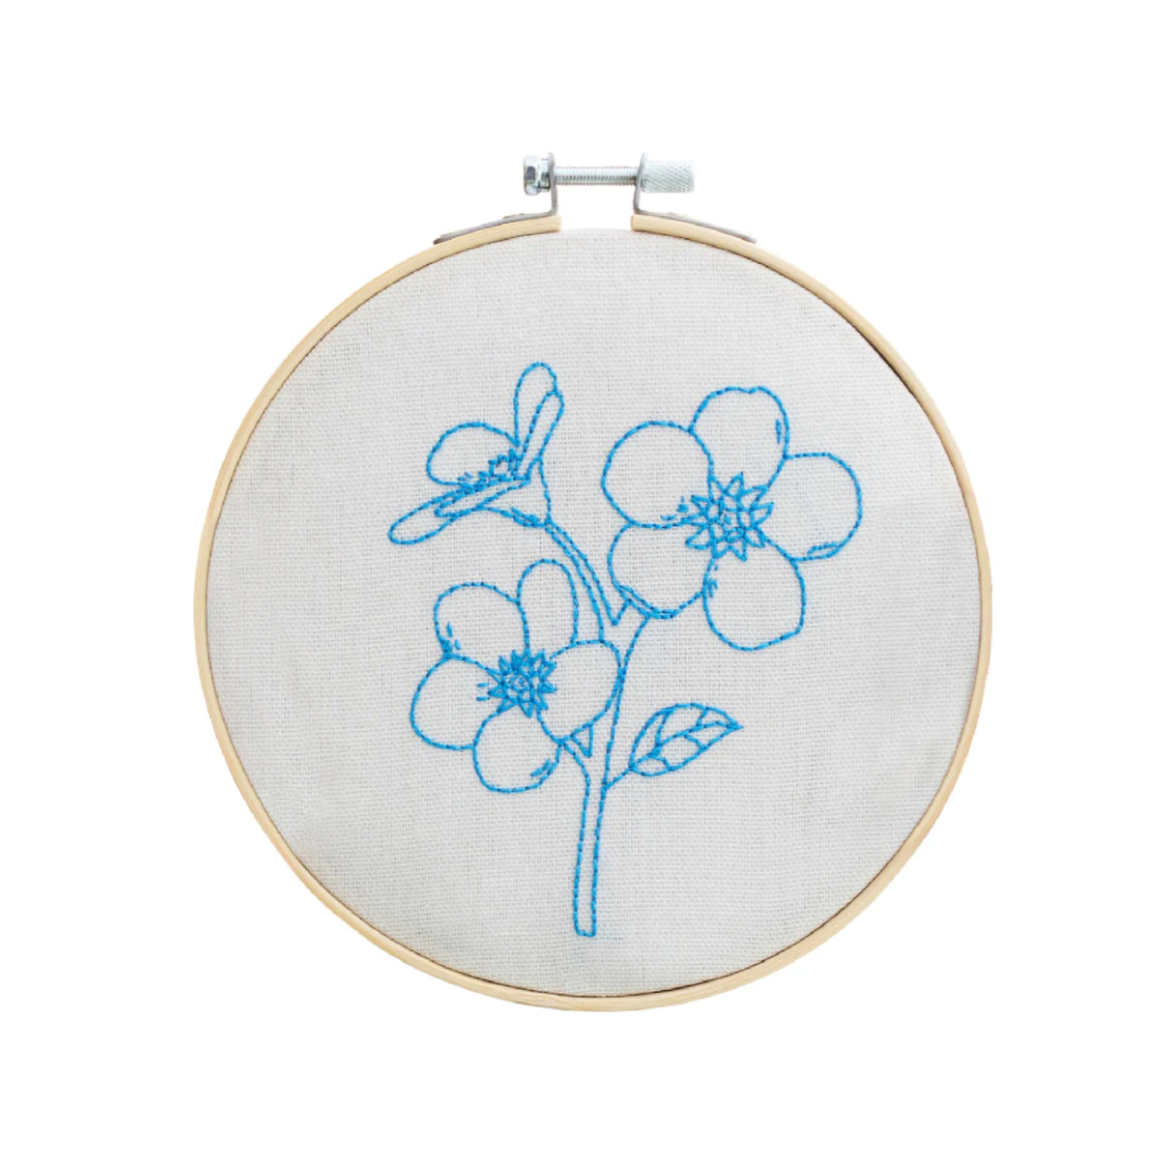 Embroidery hoop of a white piece of fabric and blue string that's stitch pattern is in the shape of forget me not flowers.